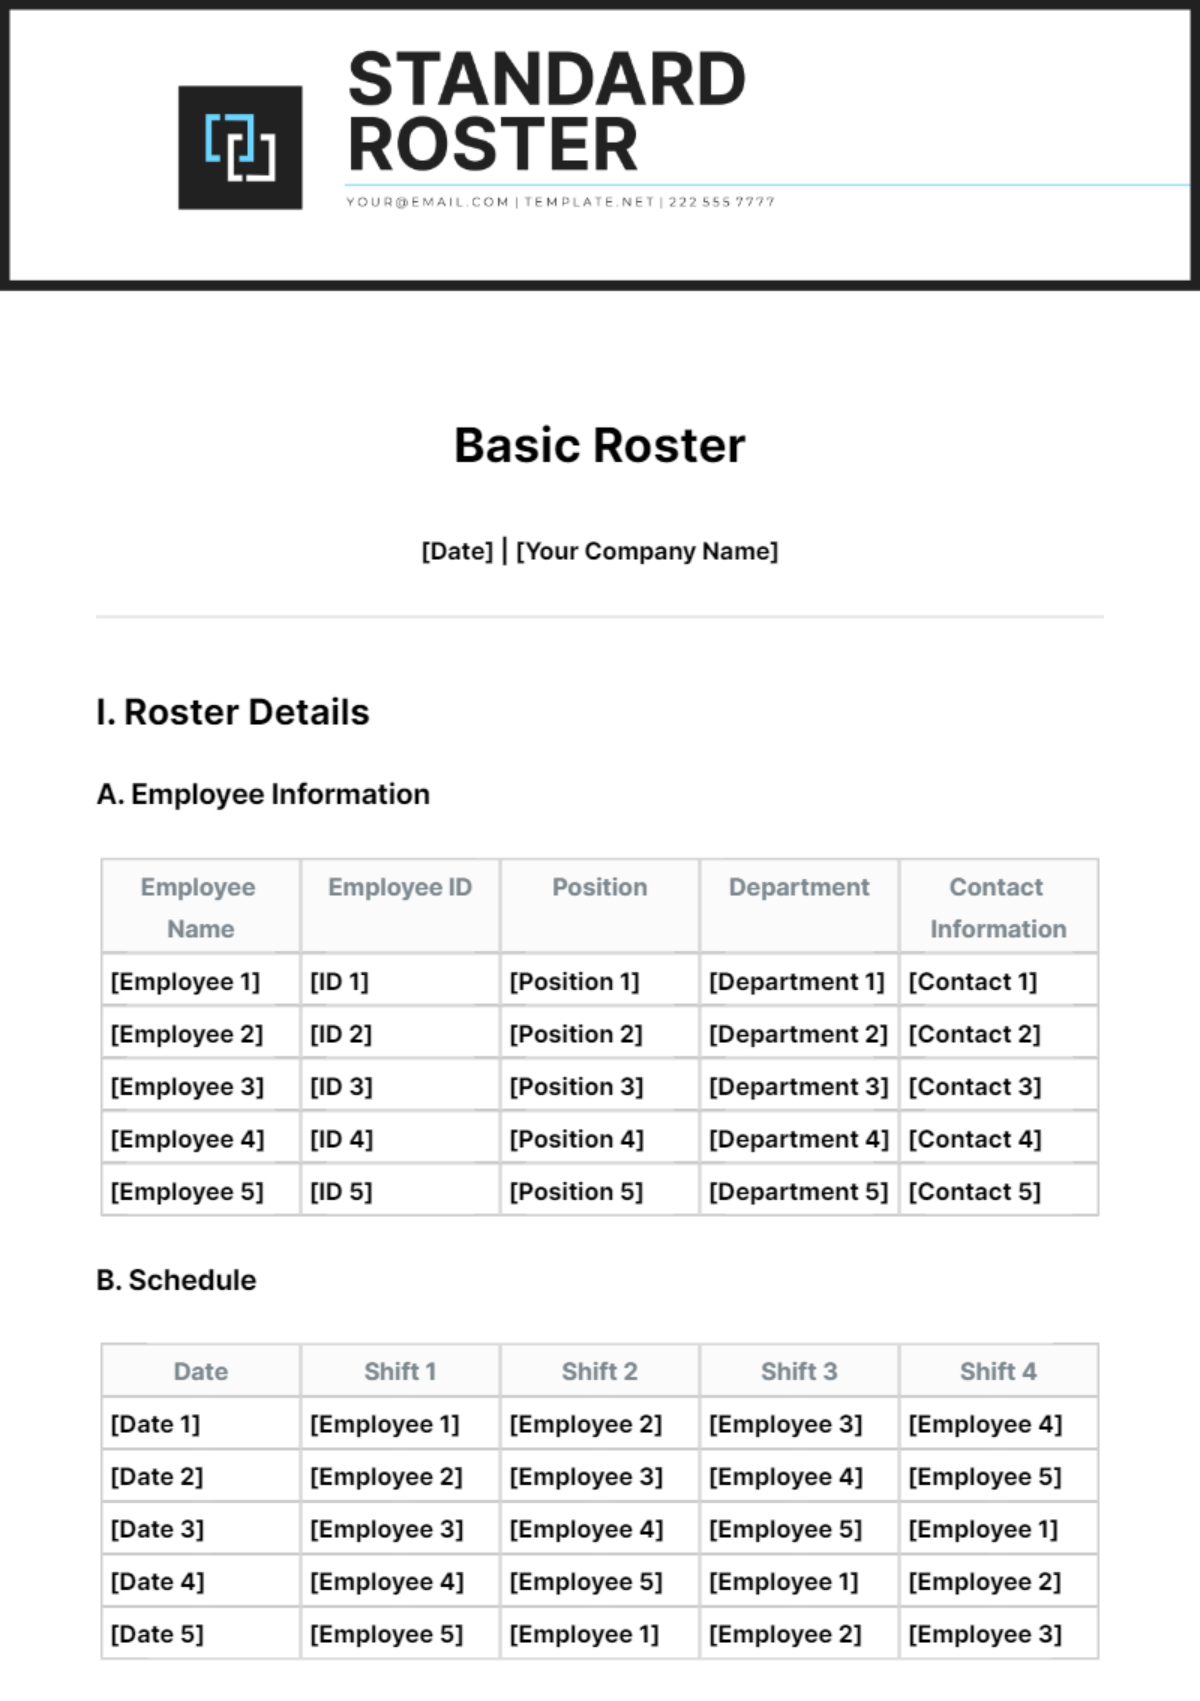 Basic Roster Template